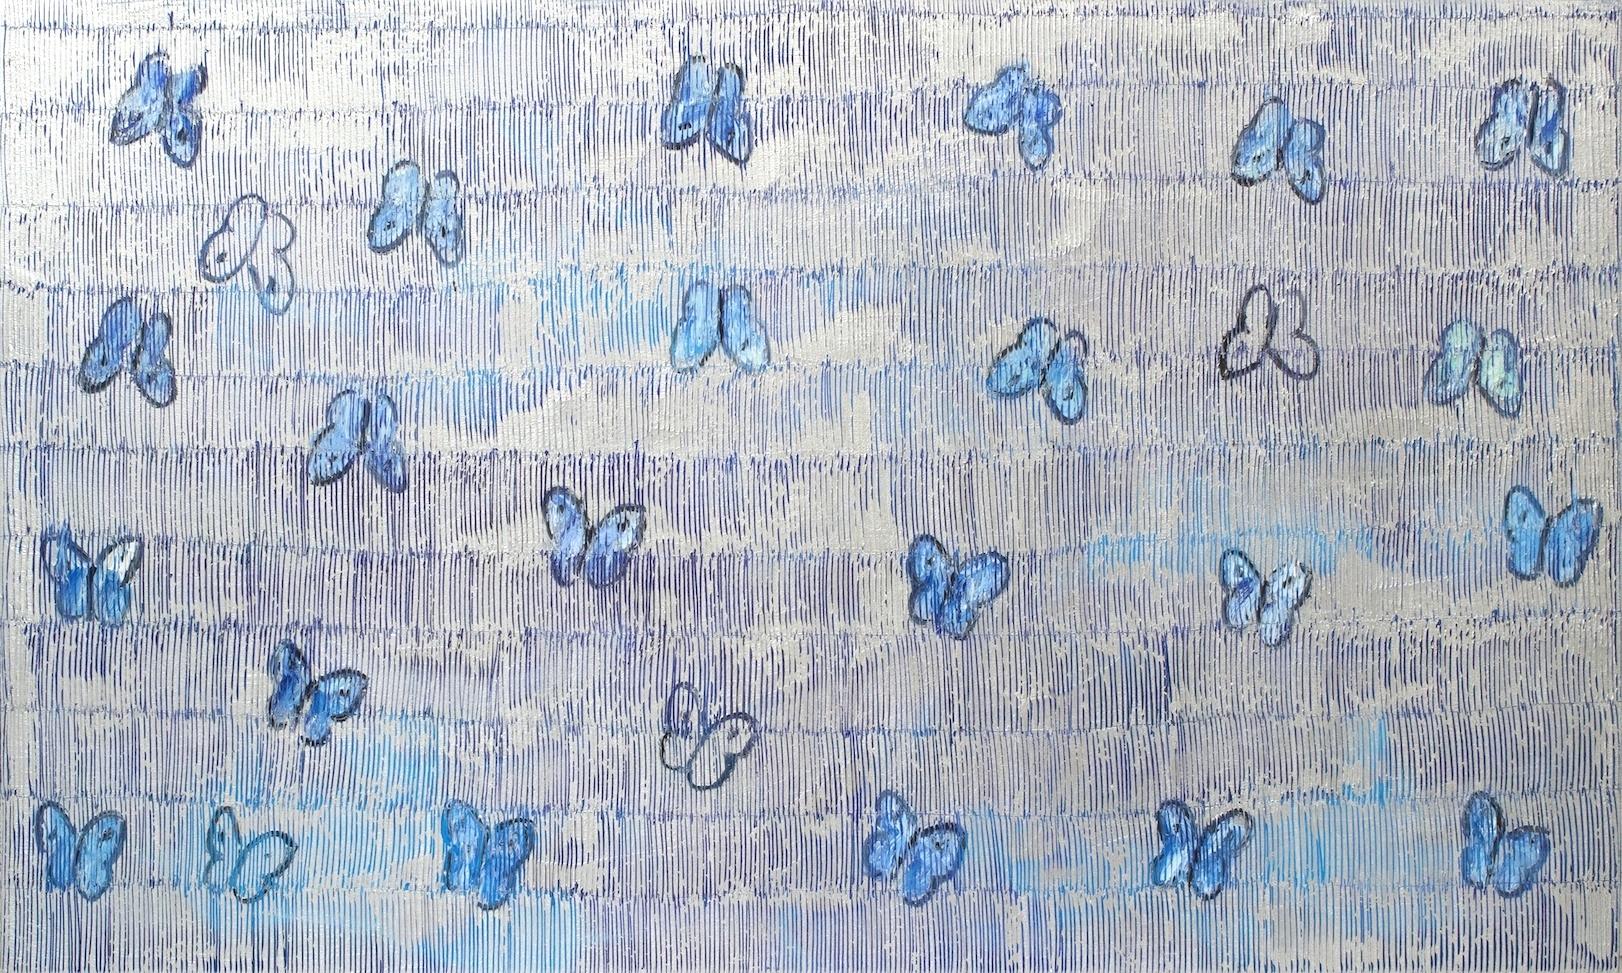 Butterflies on blue and silver